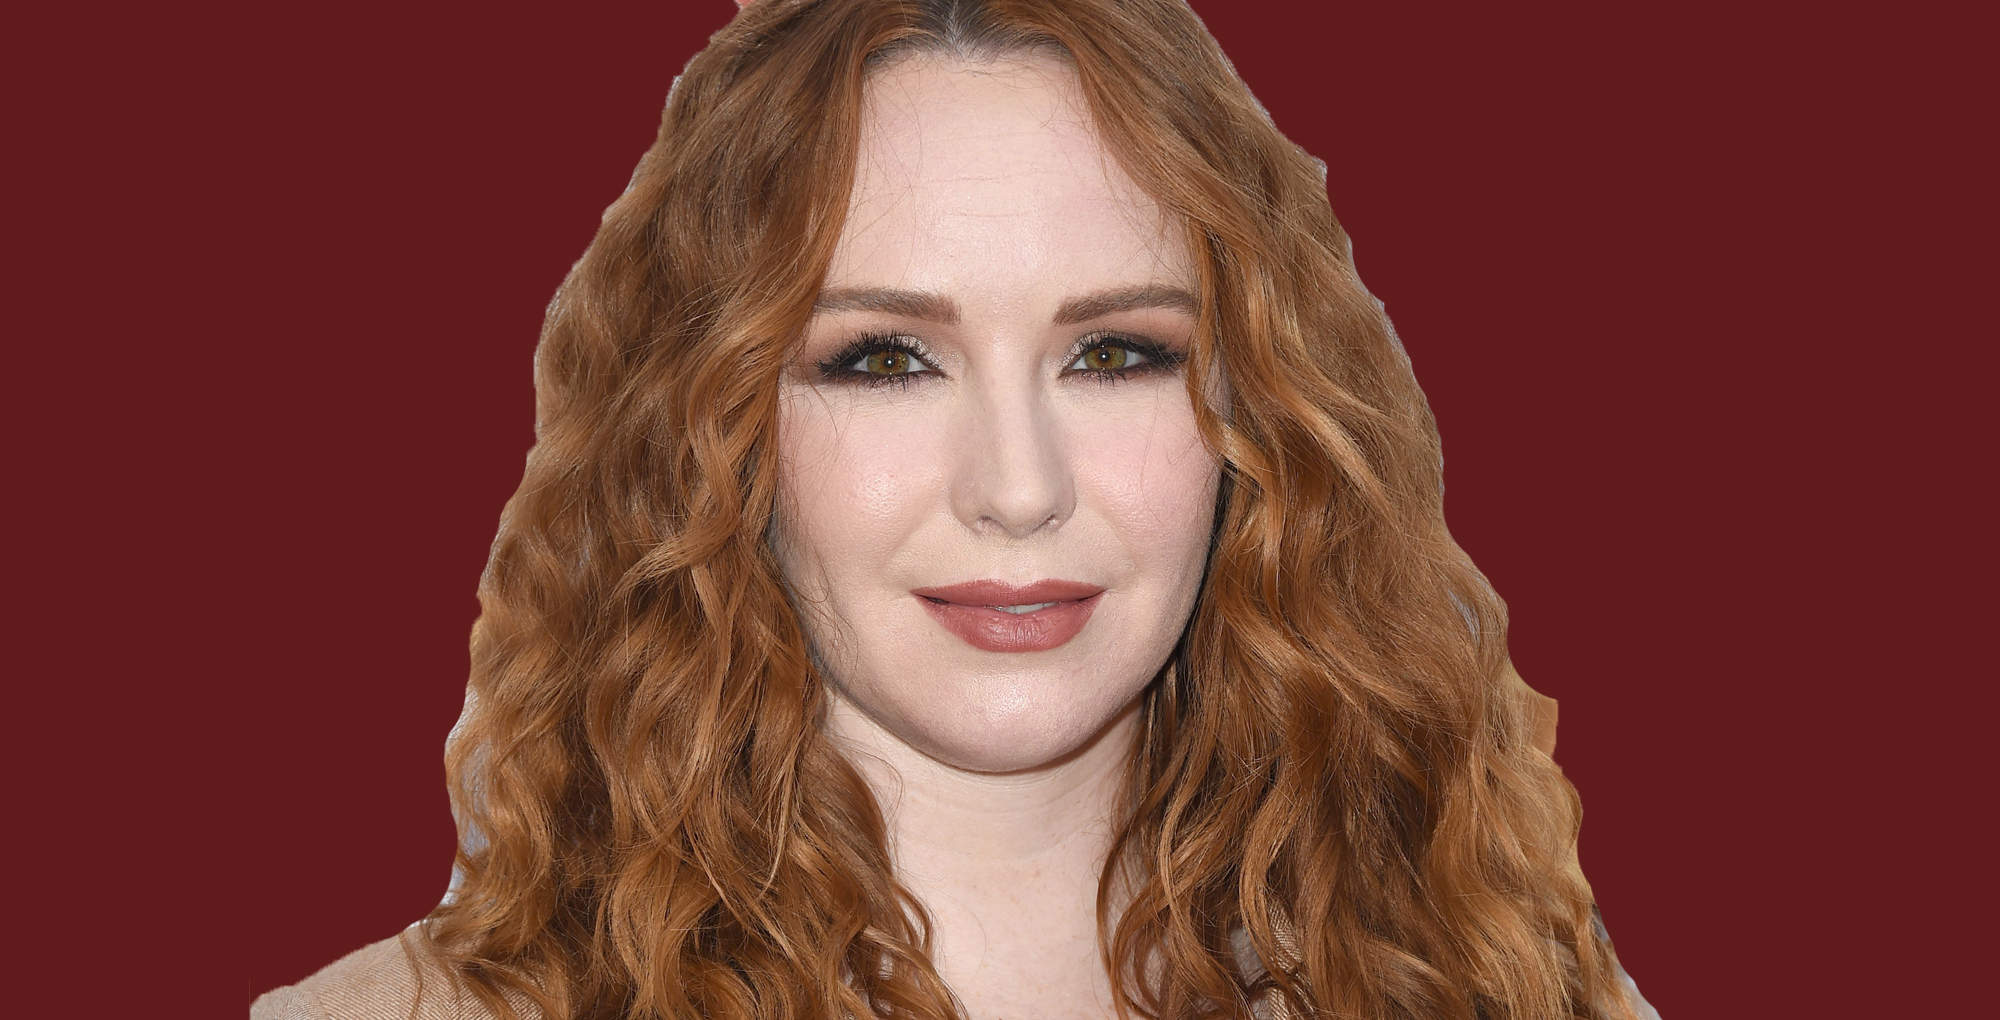 camryn grimes who plays mariah on young and the restless.